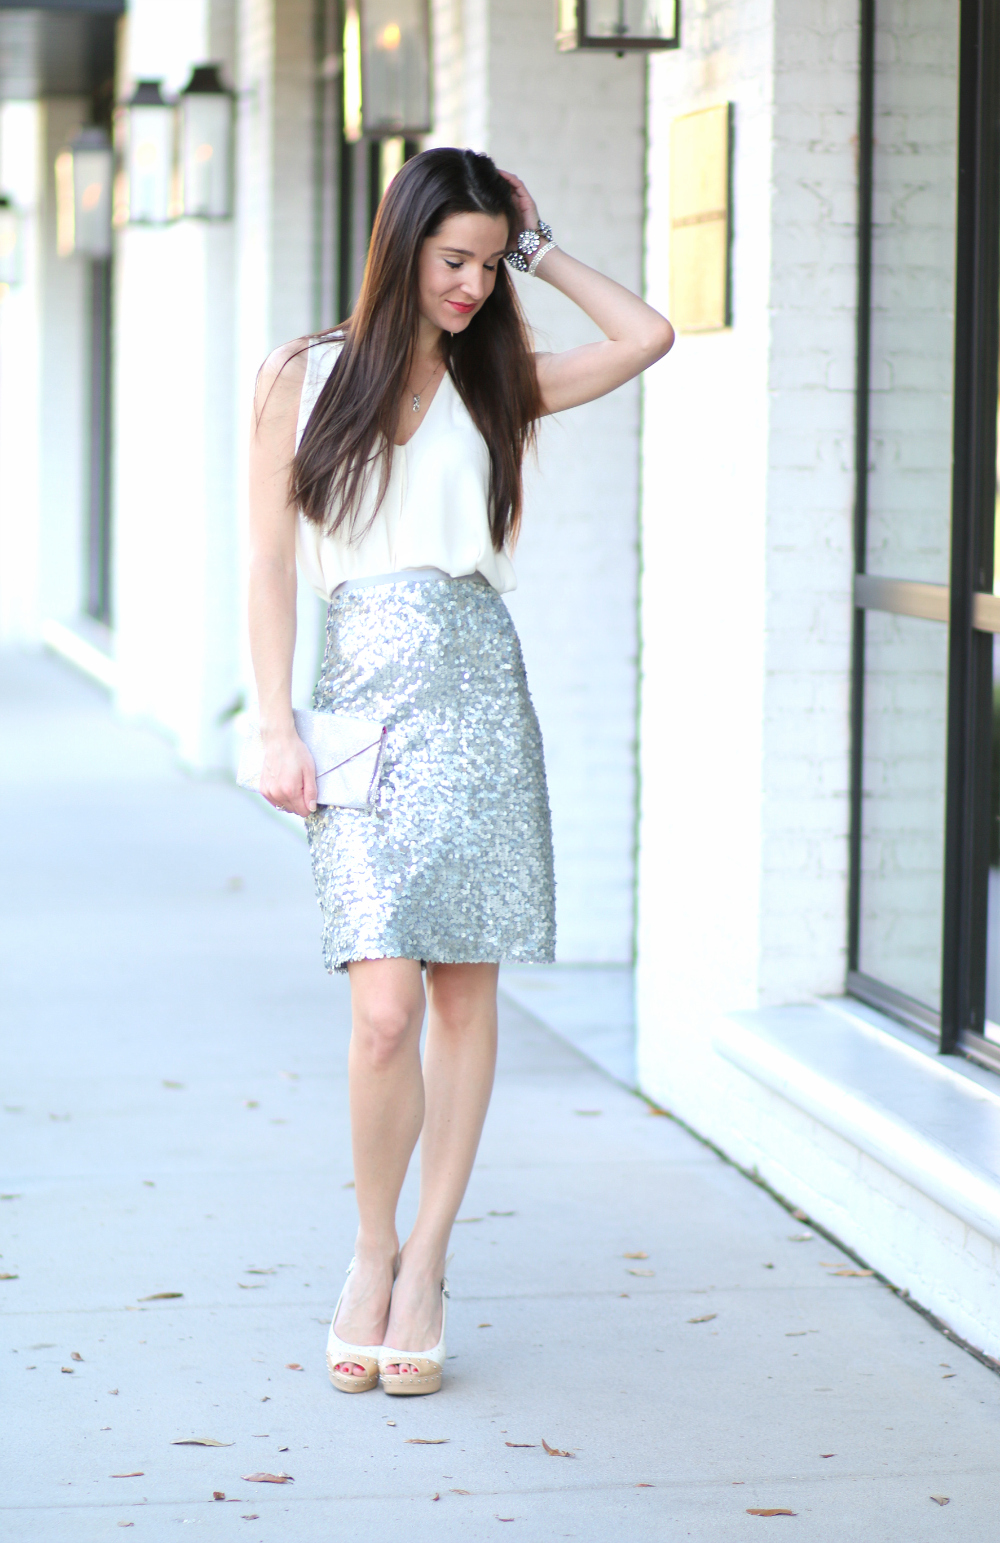 New Year's Outfit, NYE Outfit, Sequin Pencil Skirt, J. Crew Pencil Skirt, Stephanie Ziajka, Diary of a Debutante